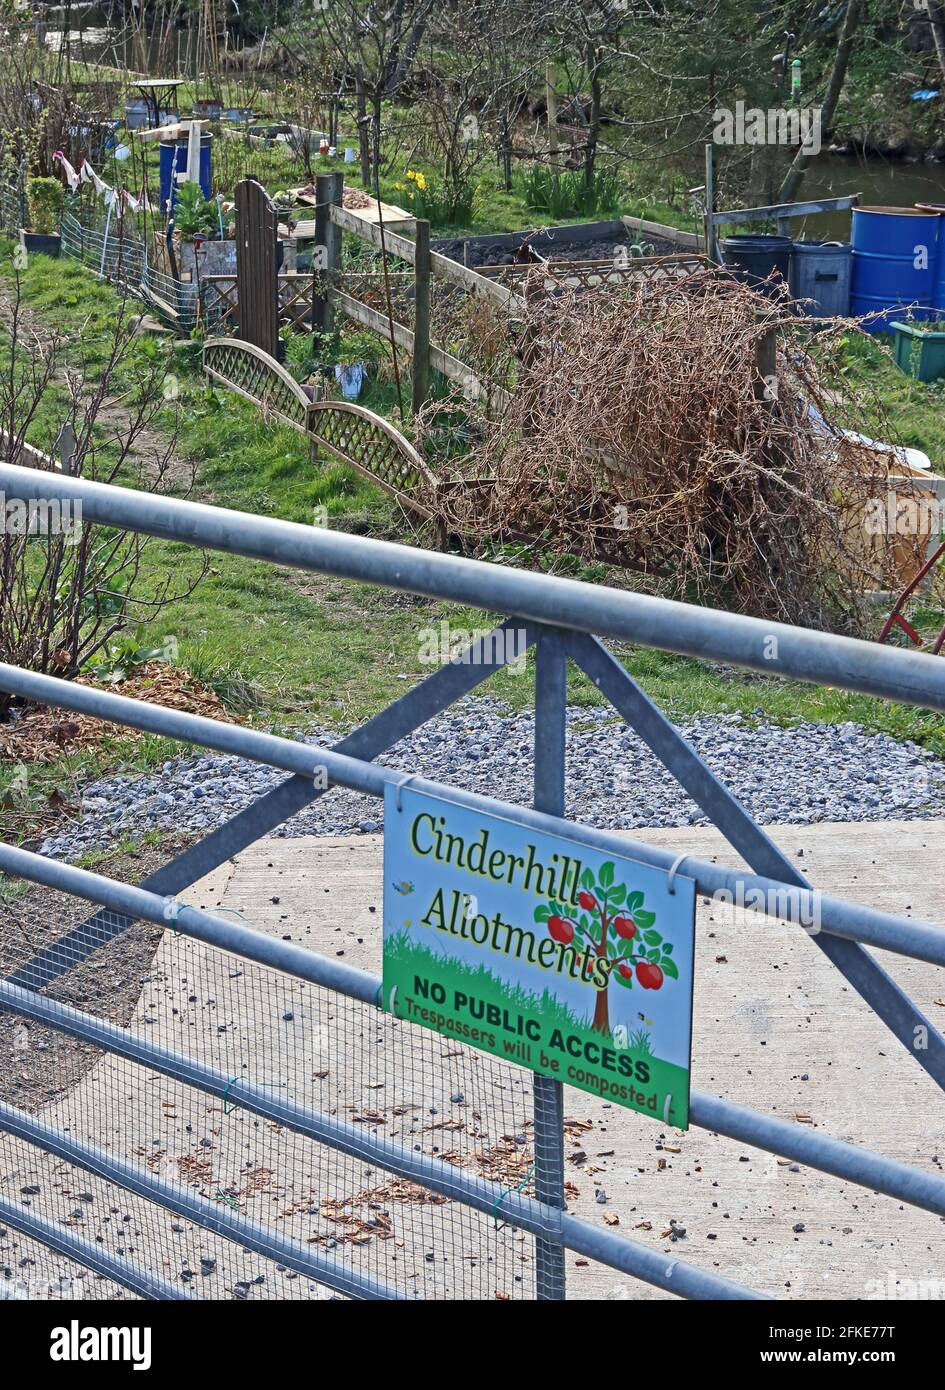 Sign on gated entrance to Cinderhill Allotments, trespassers will be composted! Stock Photo